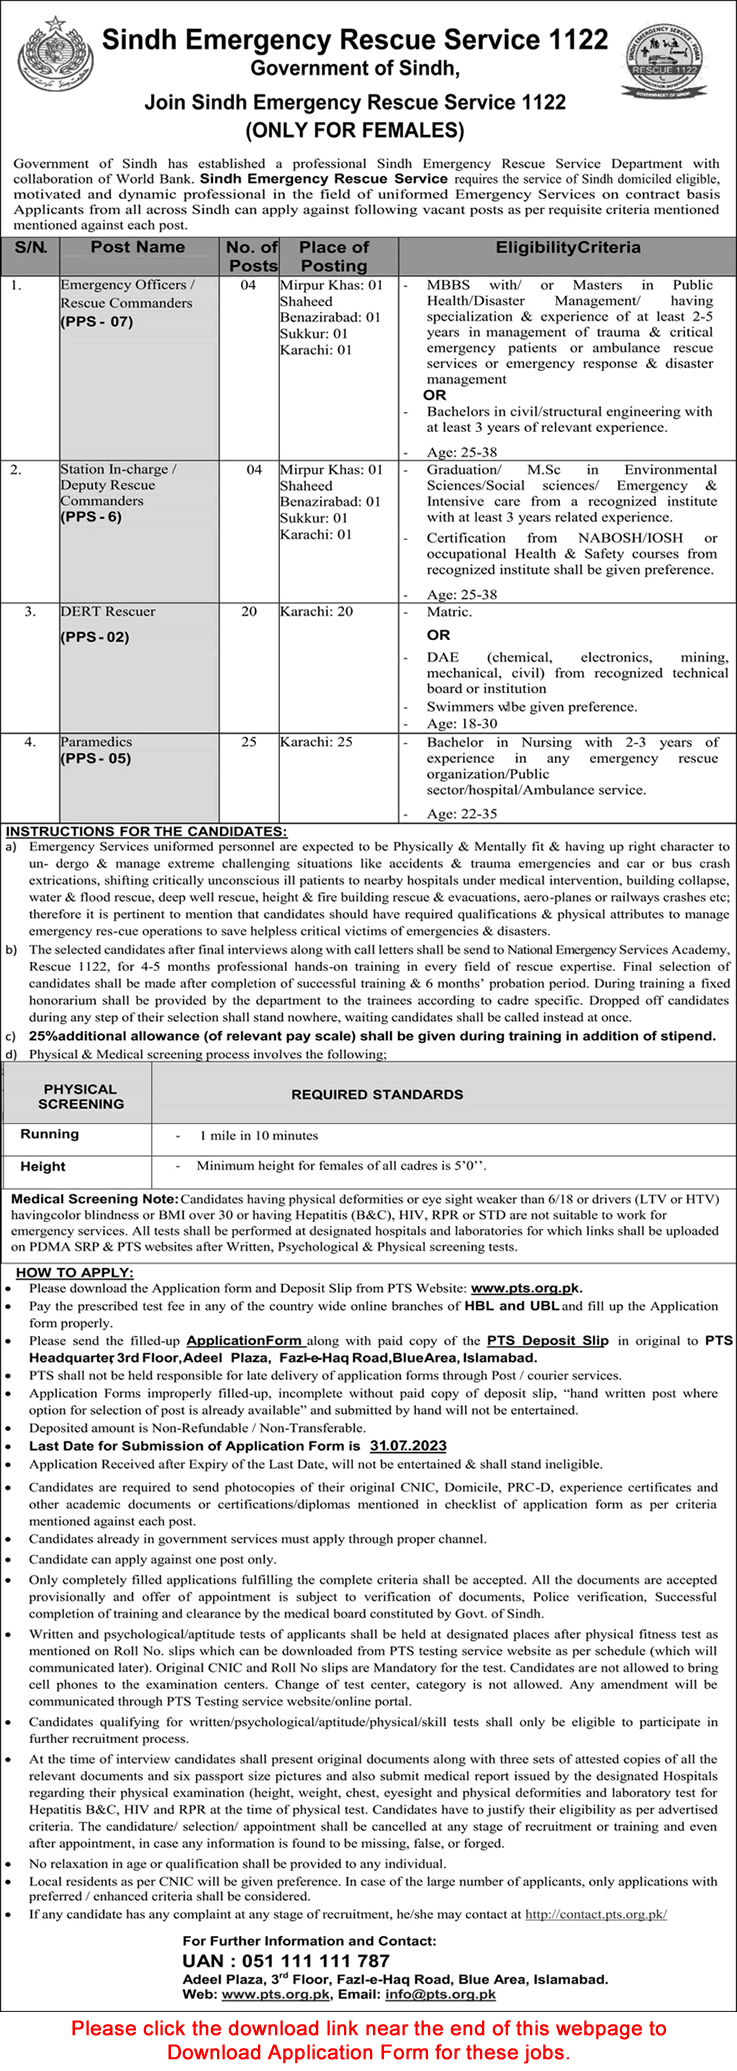 Sindh Emergency Rescue Service 1122 Jobs July 2023 PTS Application Form Join as Paramedics, DERT Rescuers & Others Latest